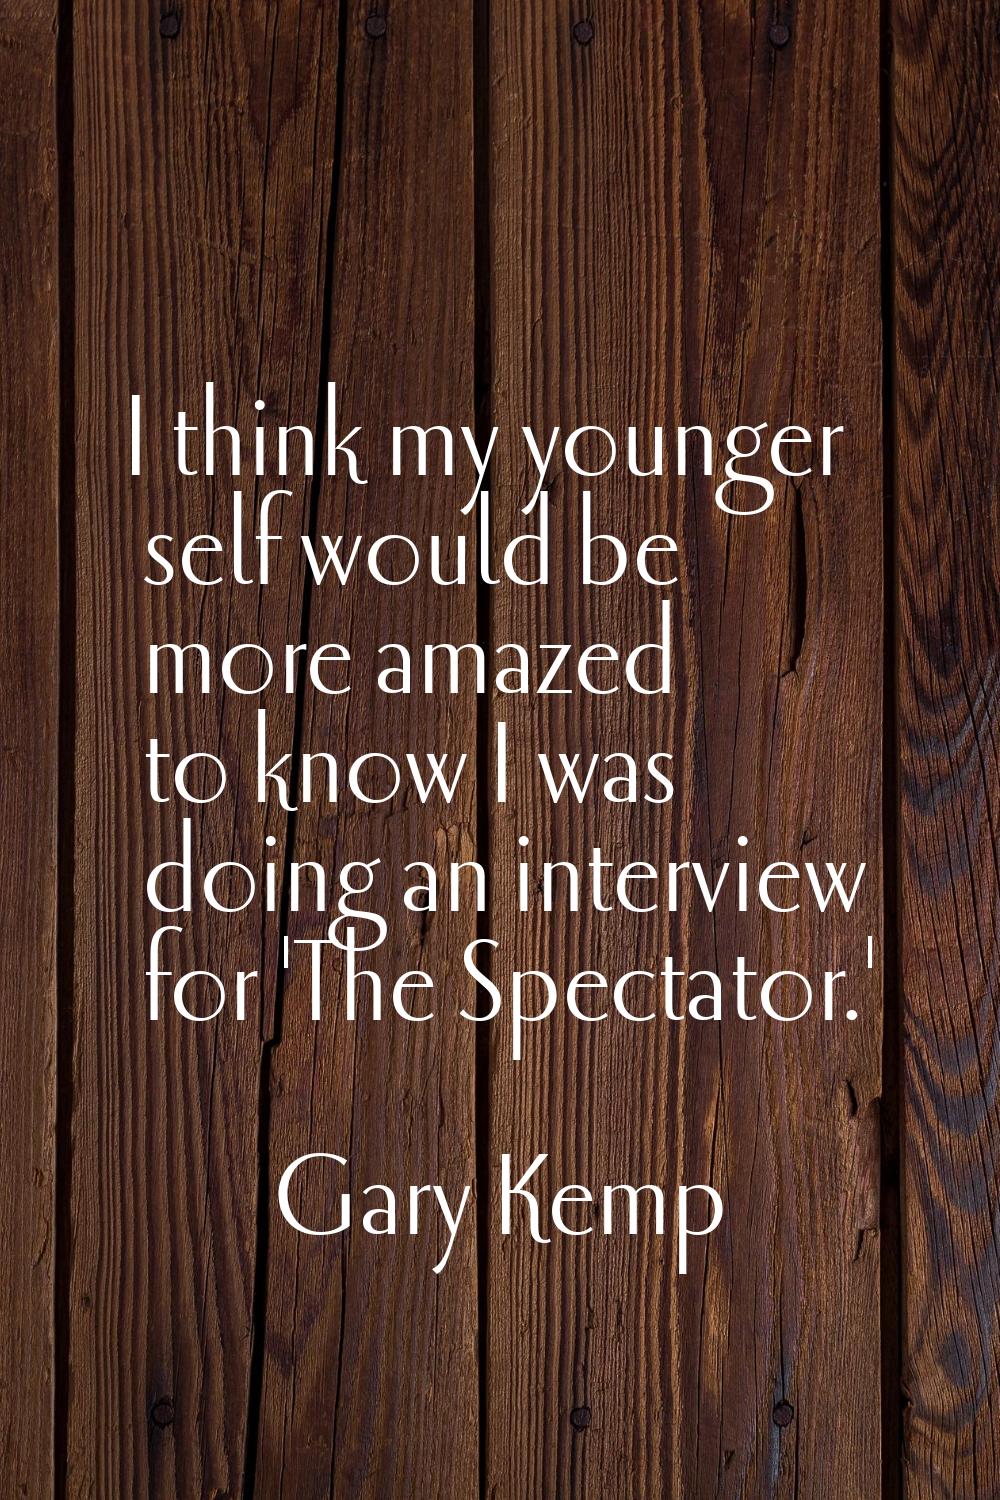 I think my younger self would be more amazed to know I was doing an interview for 'The Spectator.'